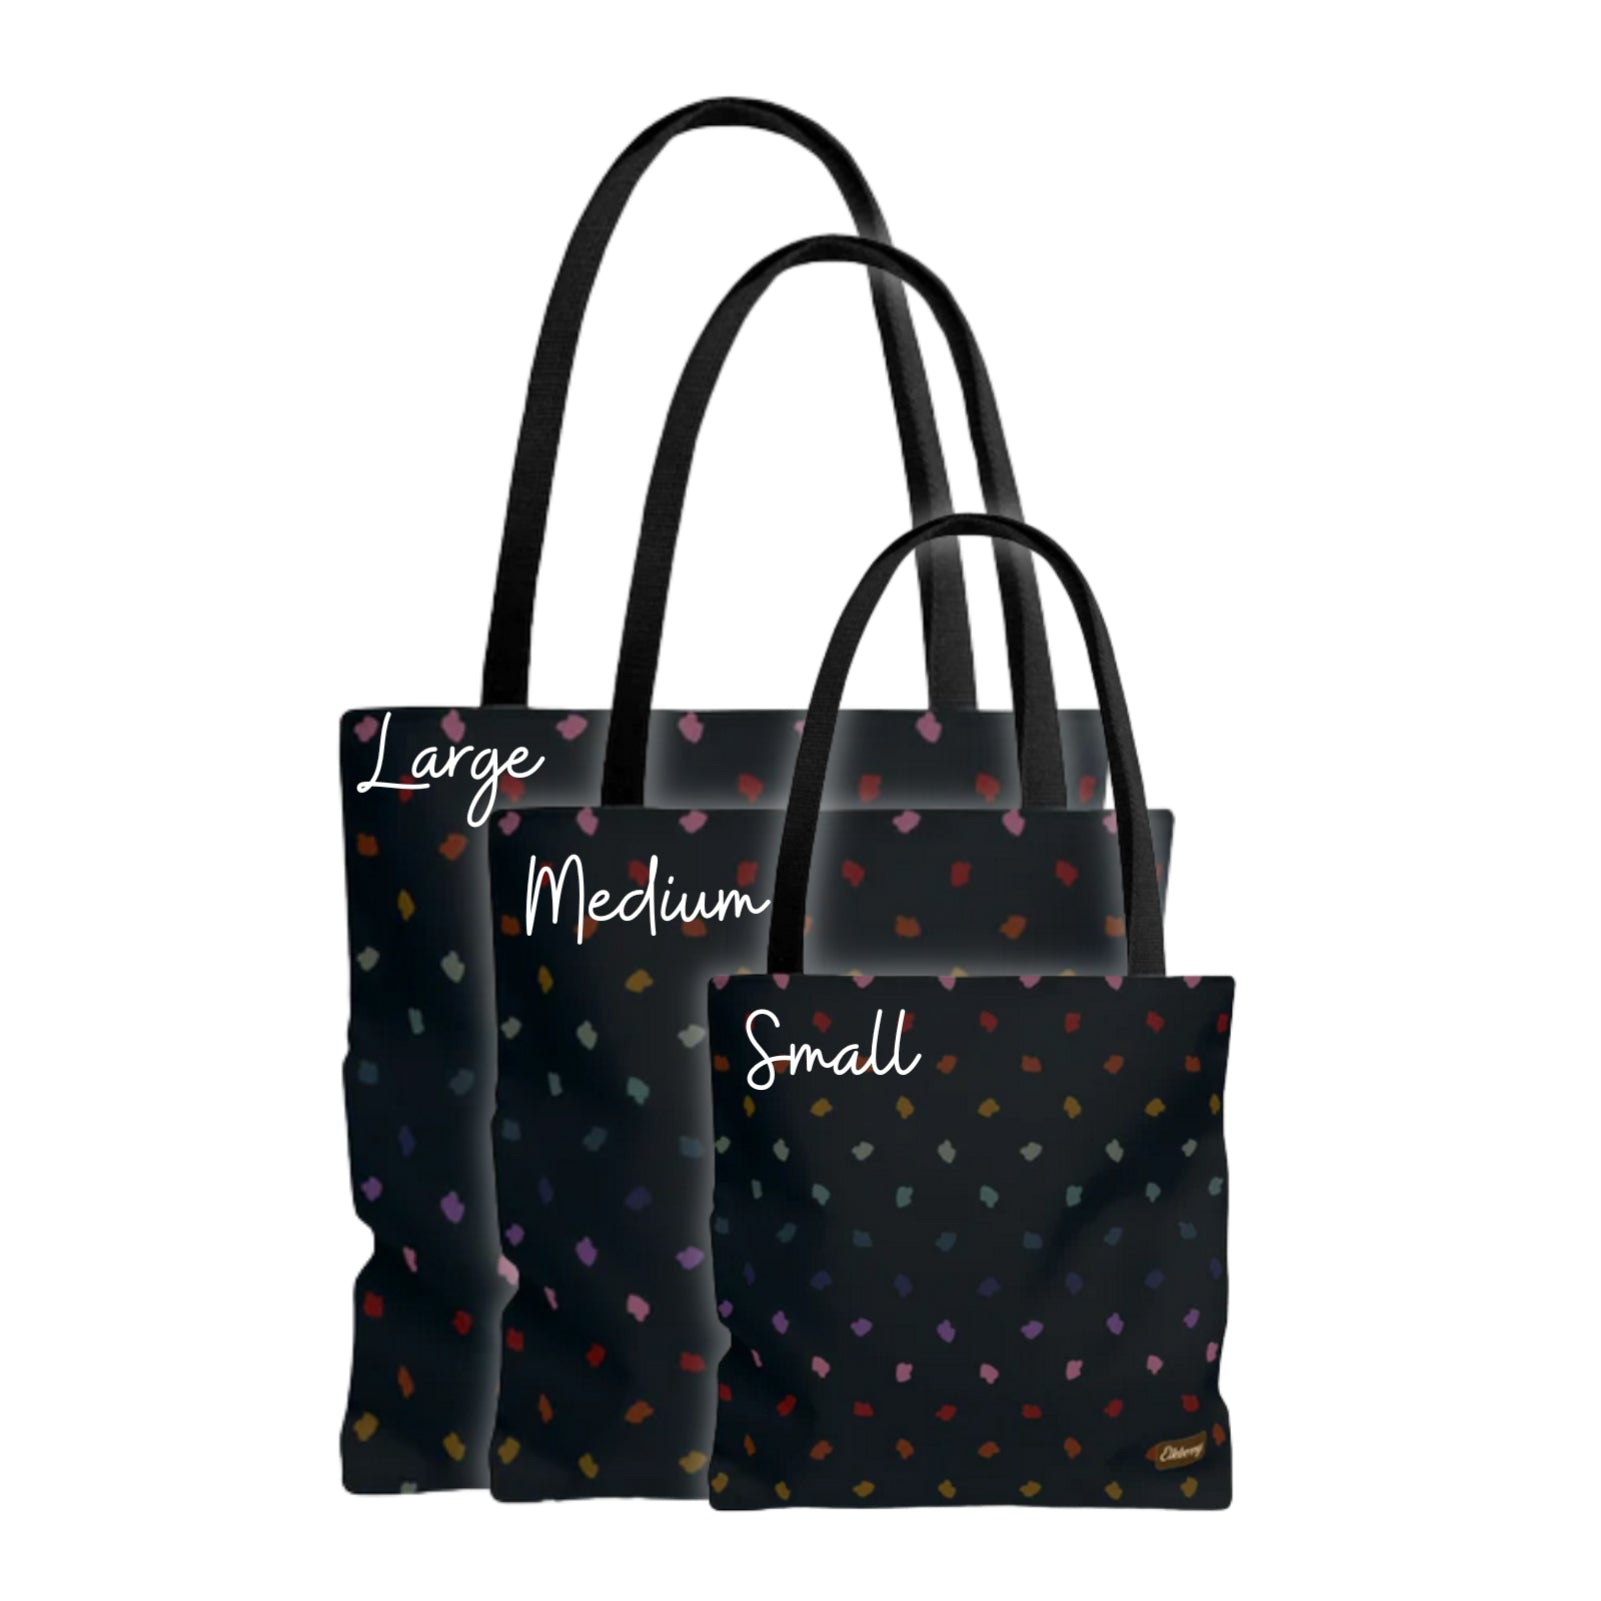 Lightweight Tote Bags